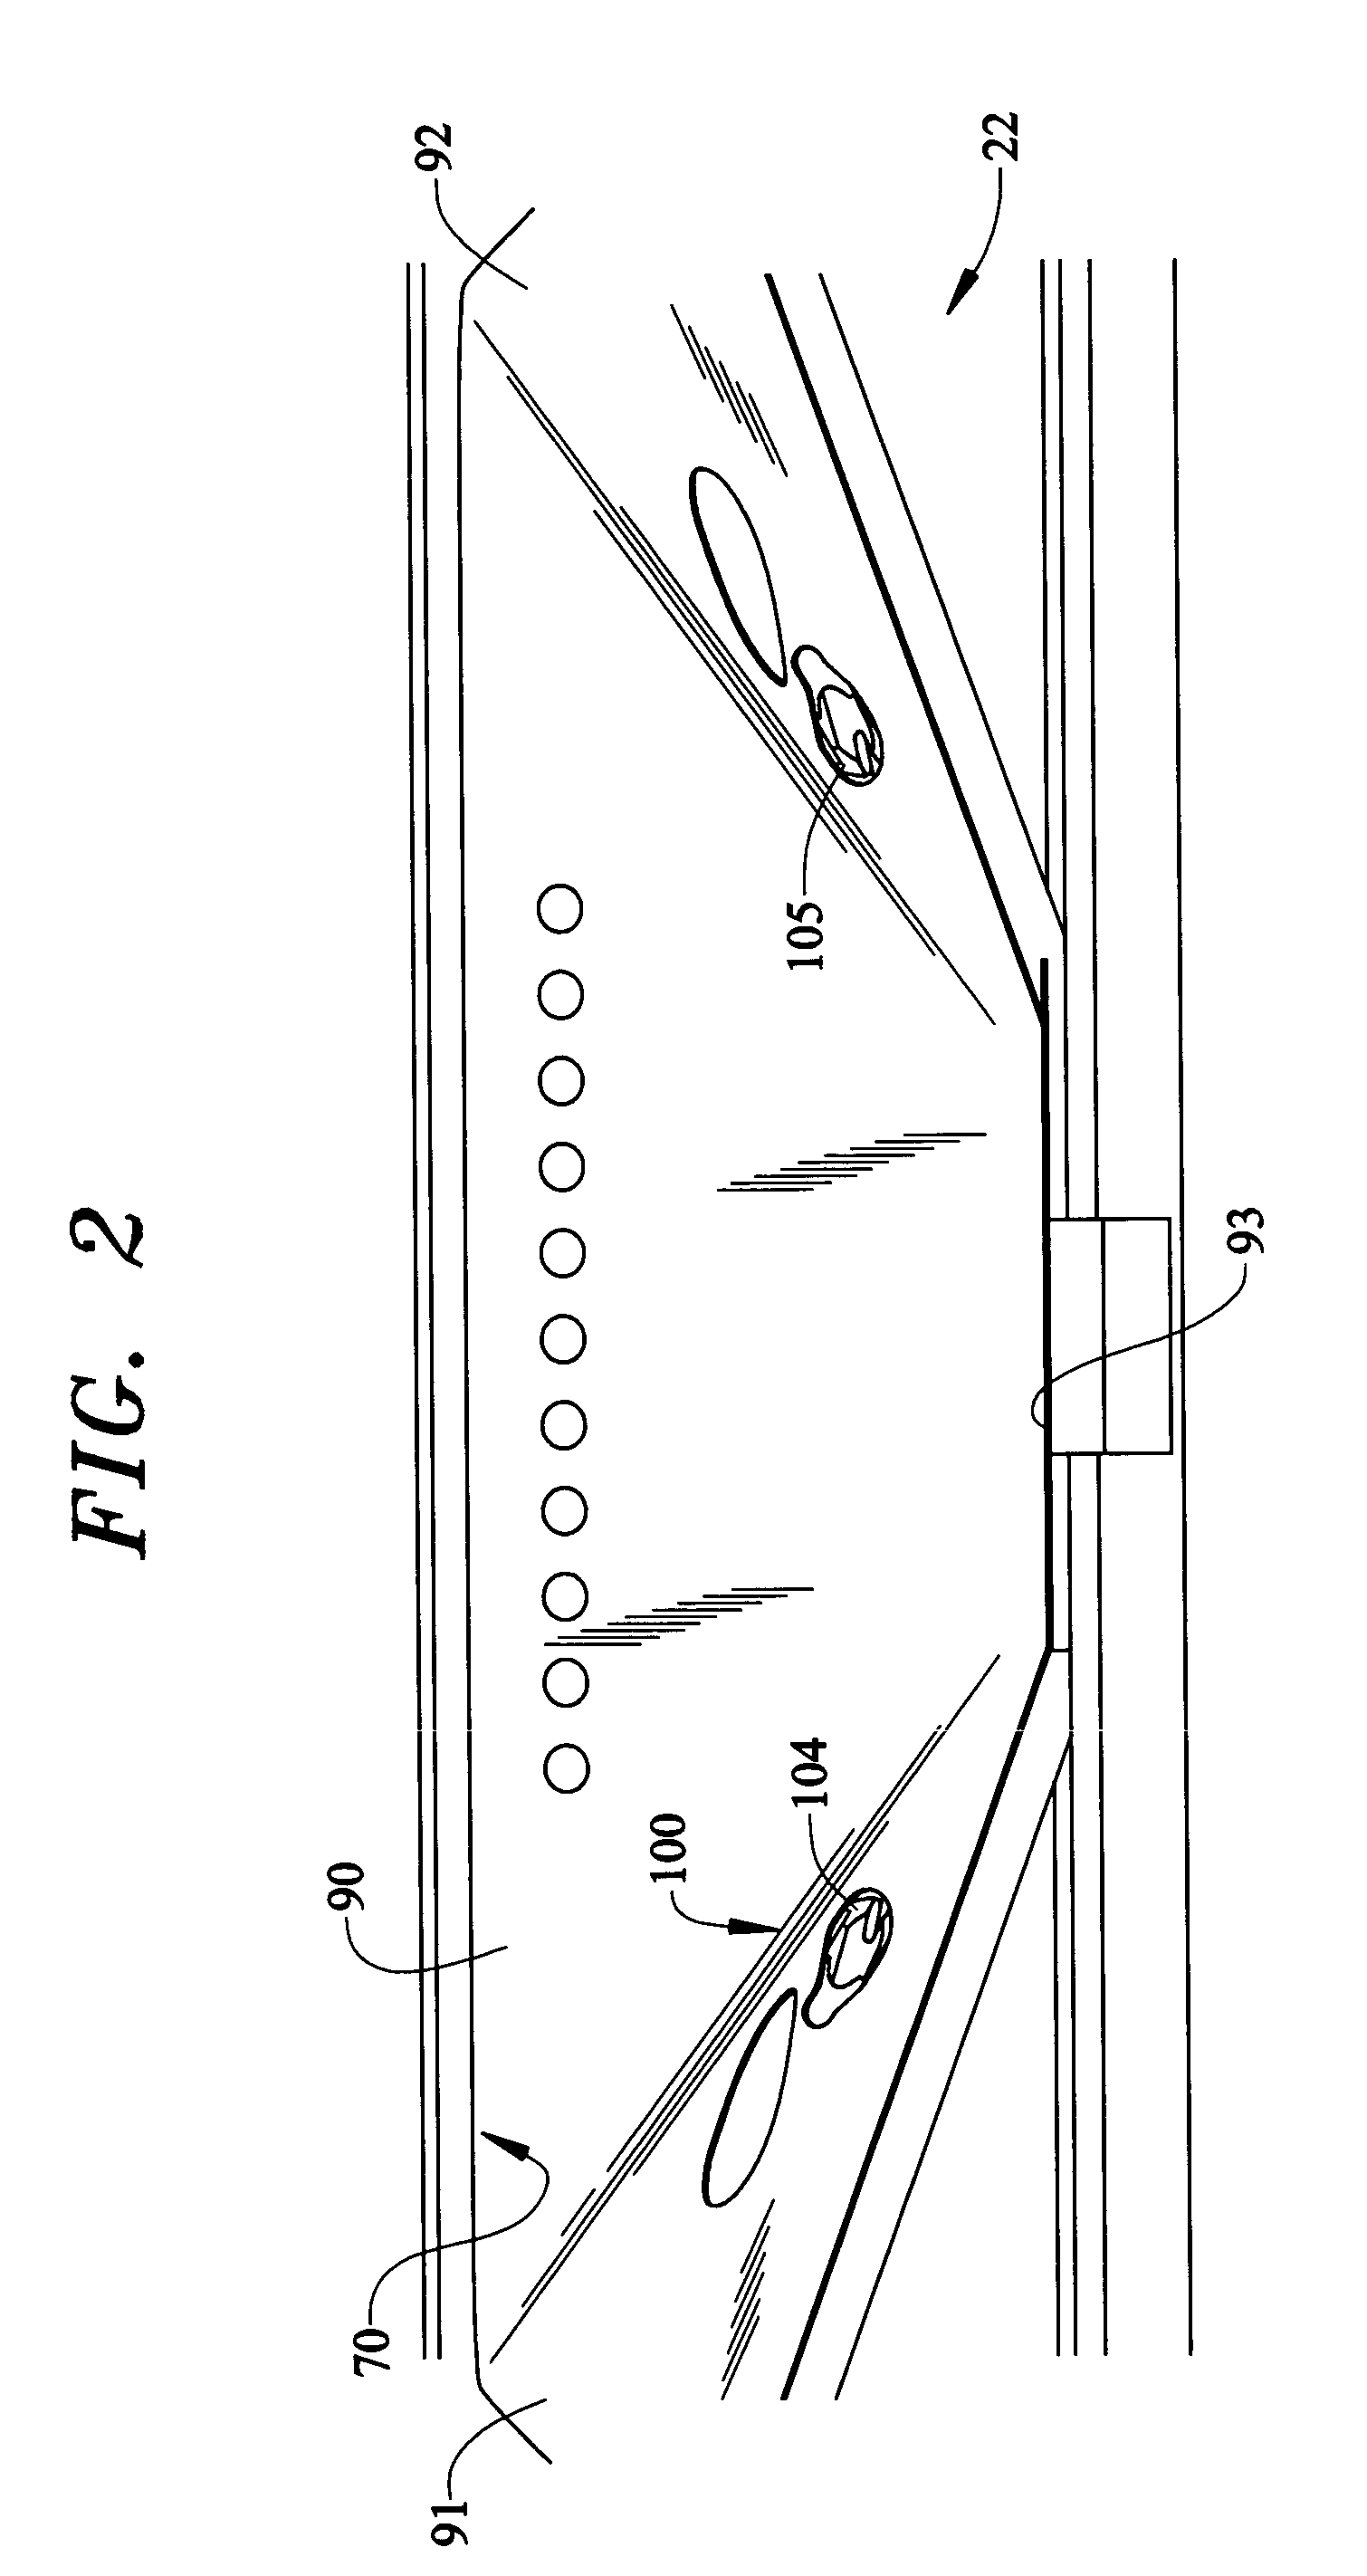 Ultrasonic sensor for detecting the dispensing of a product